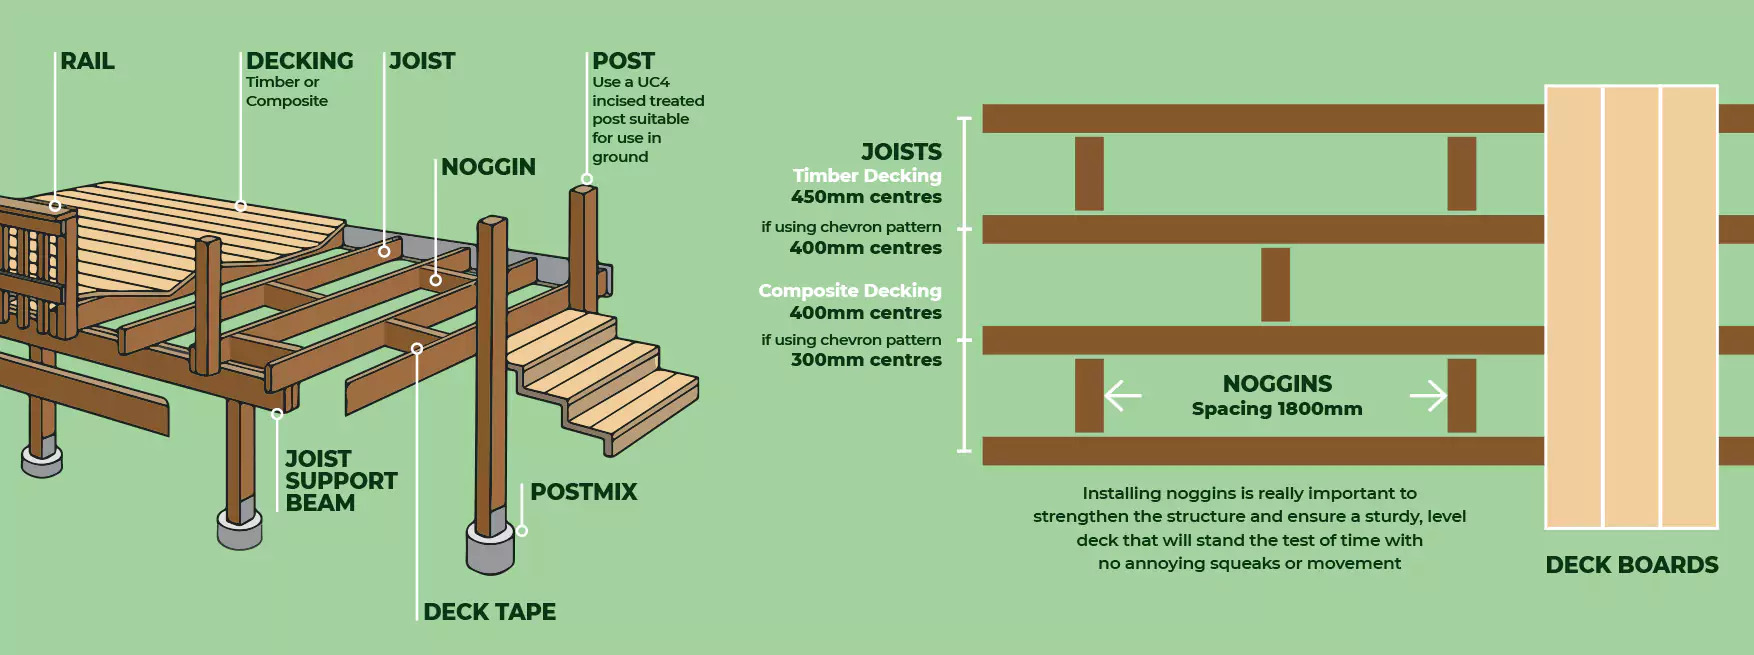 An infographic image of where to place decking joists, noggins, decking rails and posts.